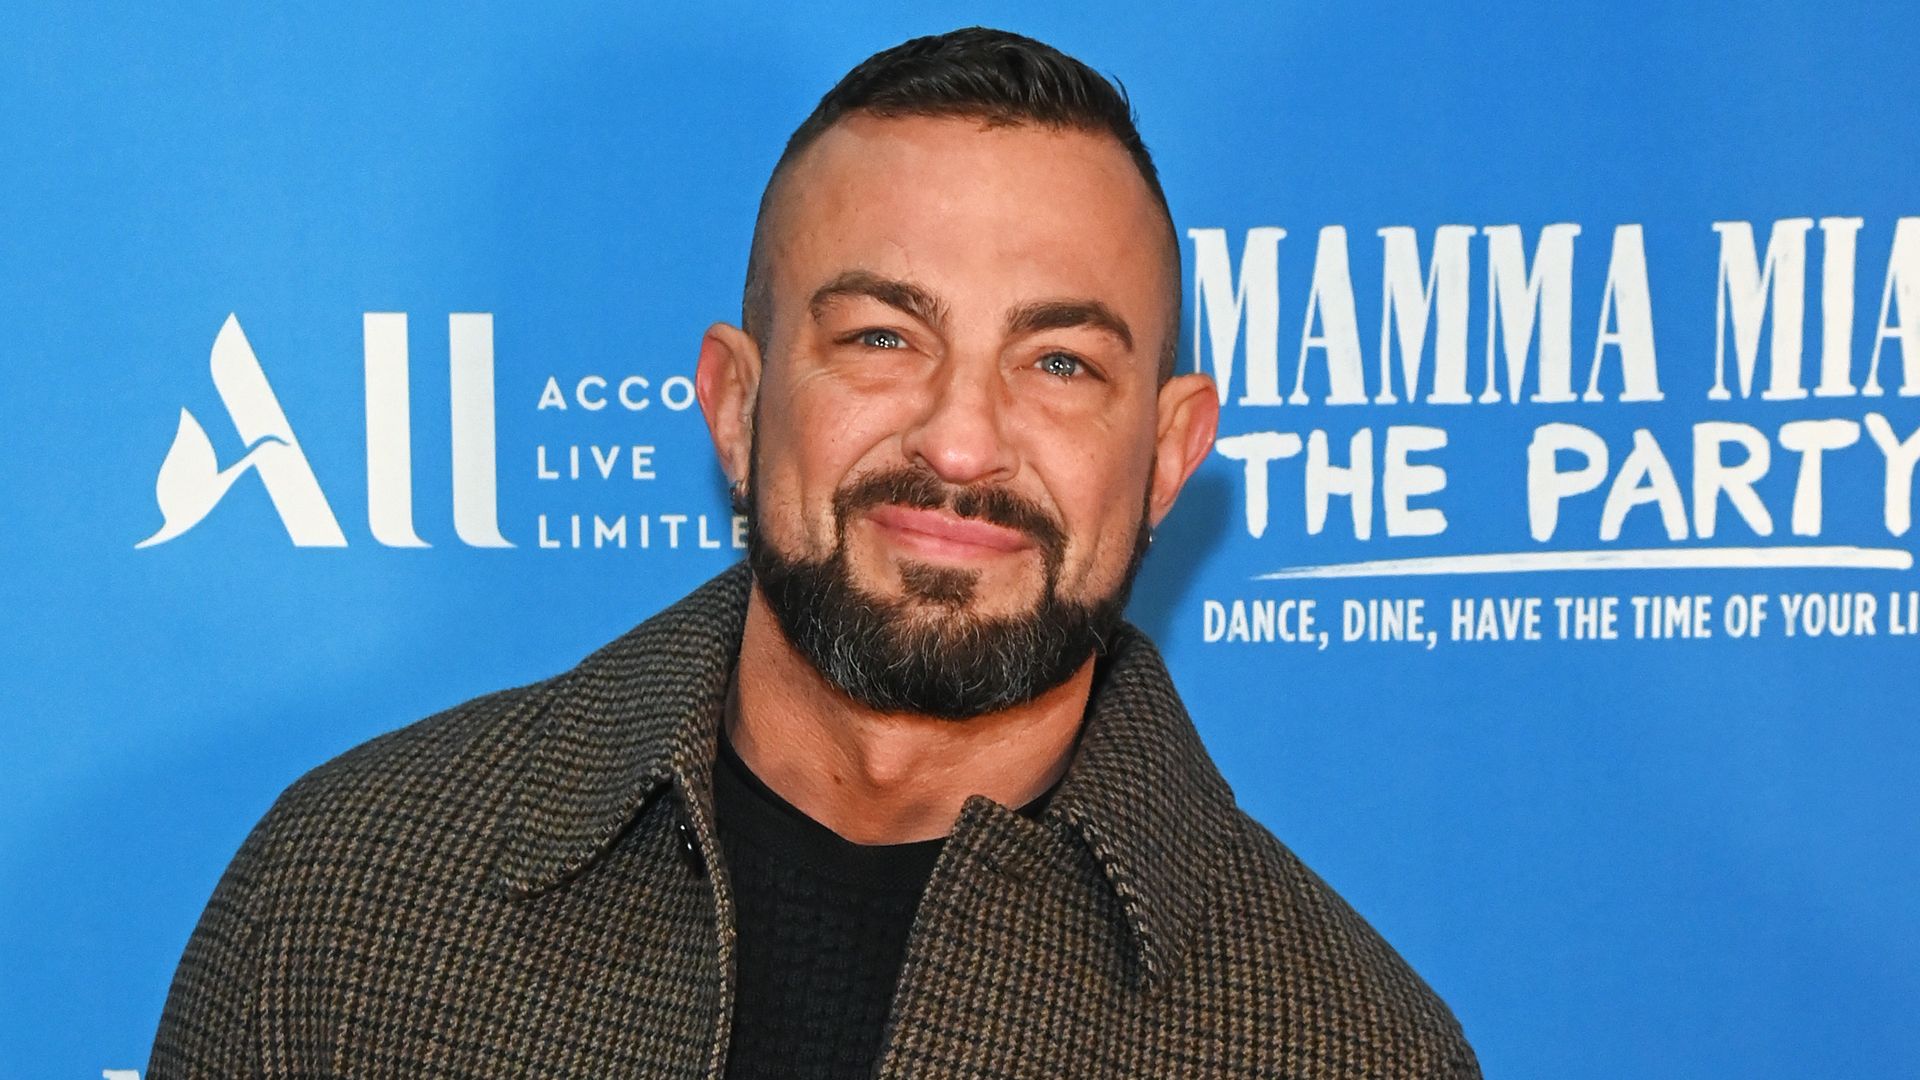 Robin Windsor attends a VIP Gala Night at "Mamma Mia! The Party" at The O2 Arena on December 7, 2022 in London, England